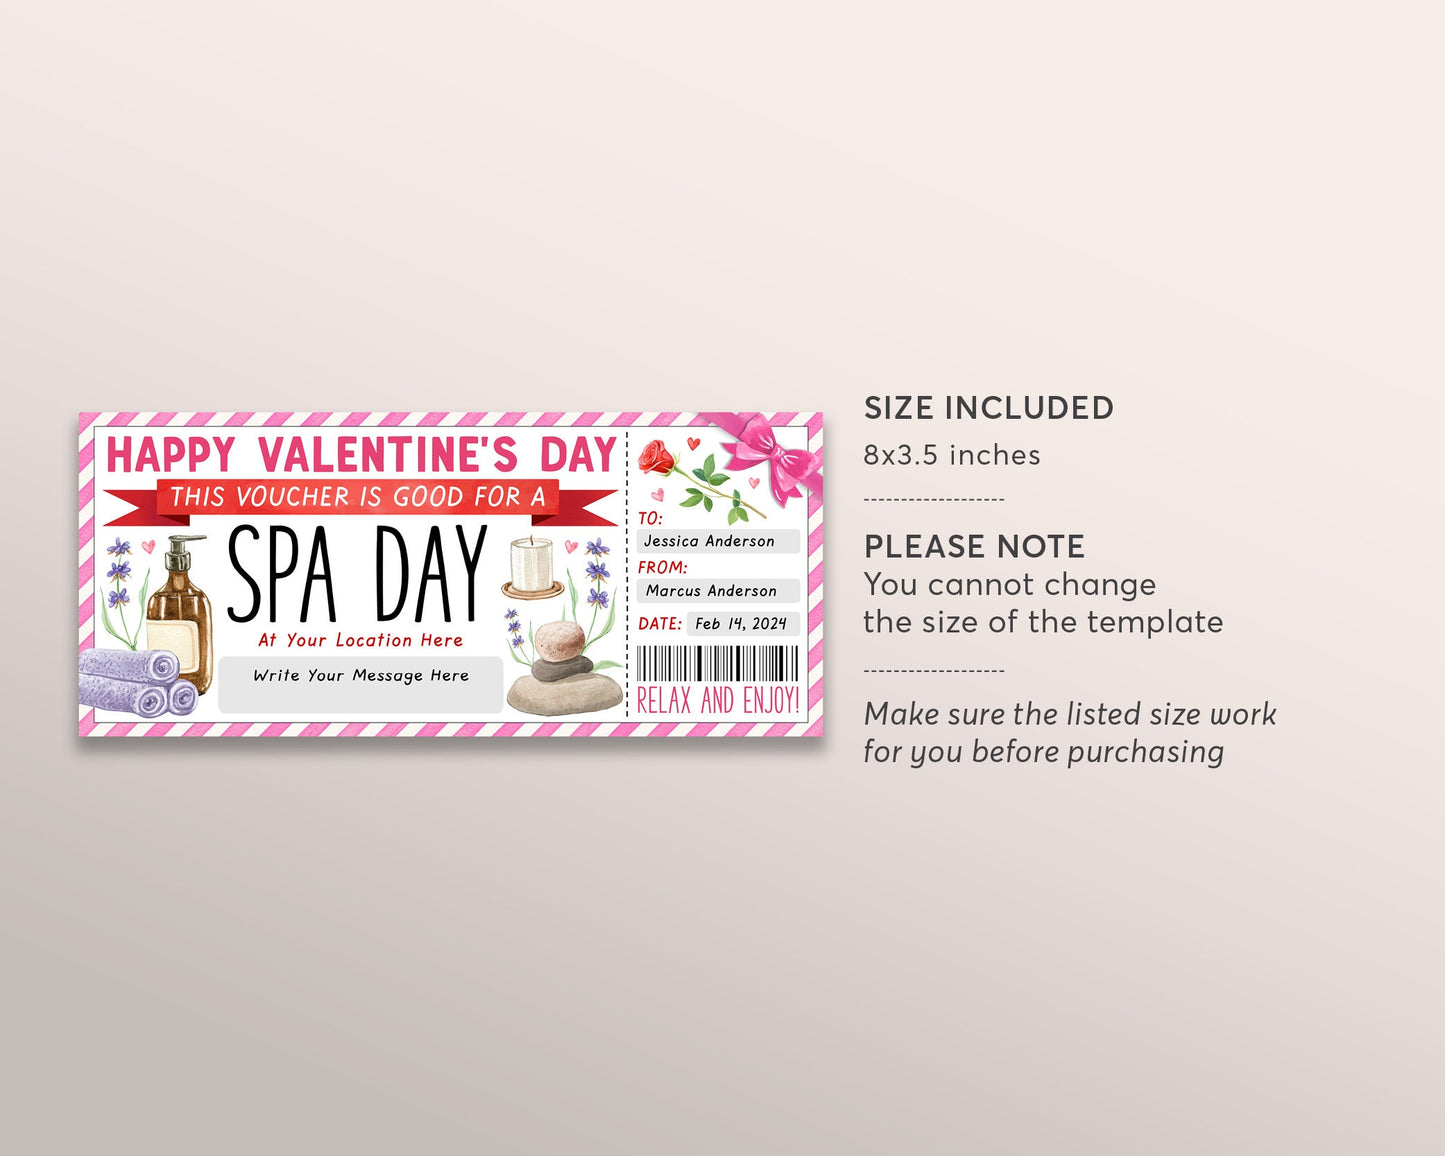 Valentines Day Spa Day Gift Voucher Ticket Editable Template, Surprise Spa Treatment Coupon Reveal, Spa Membership Package Certificate